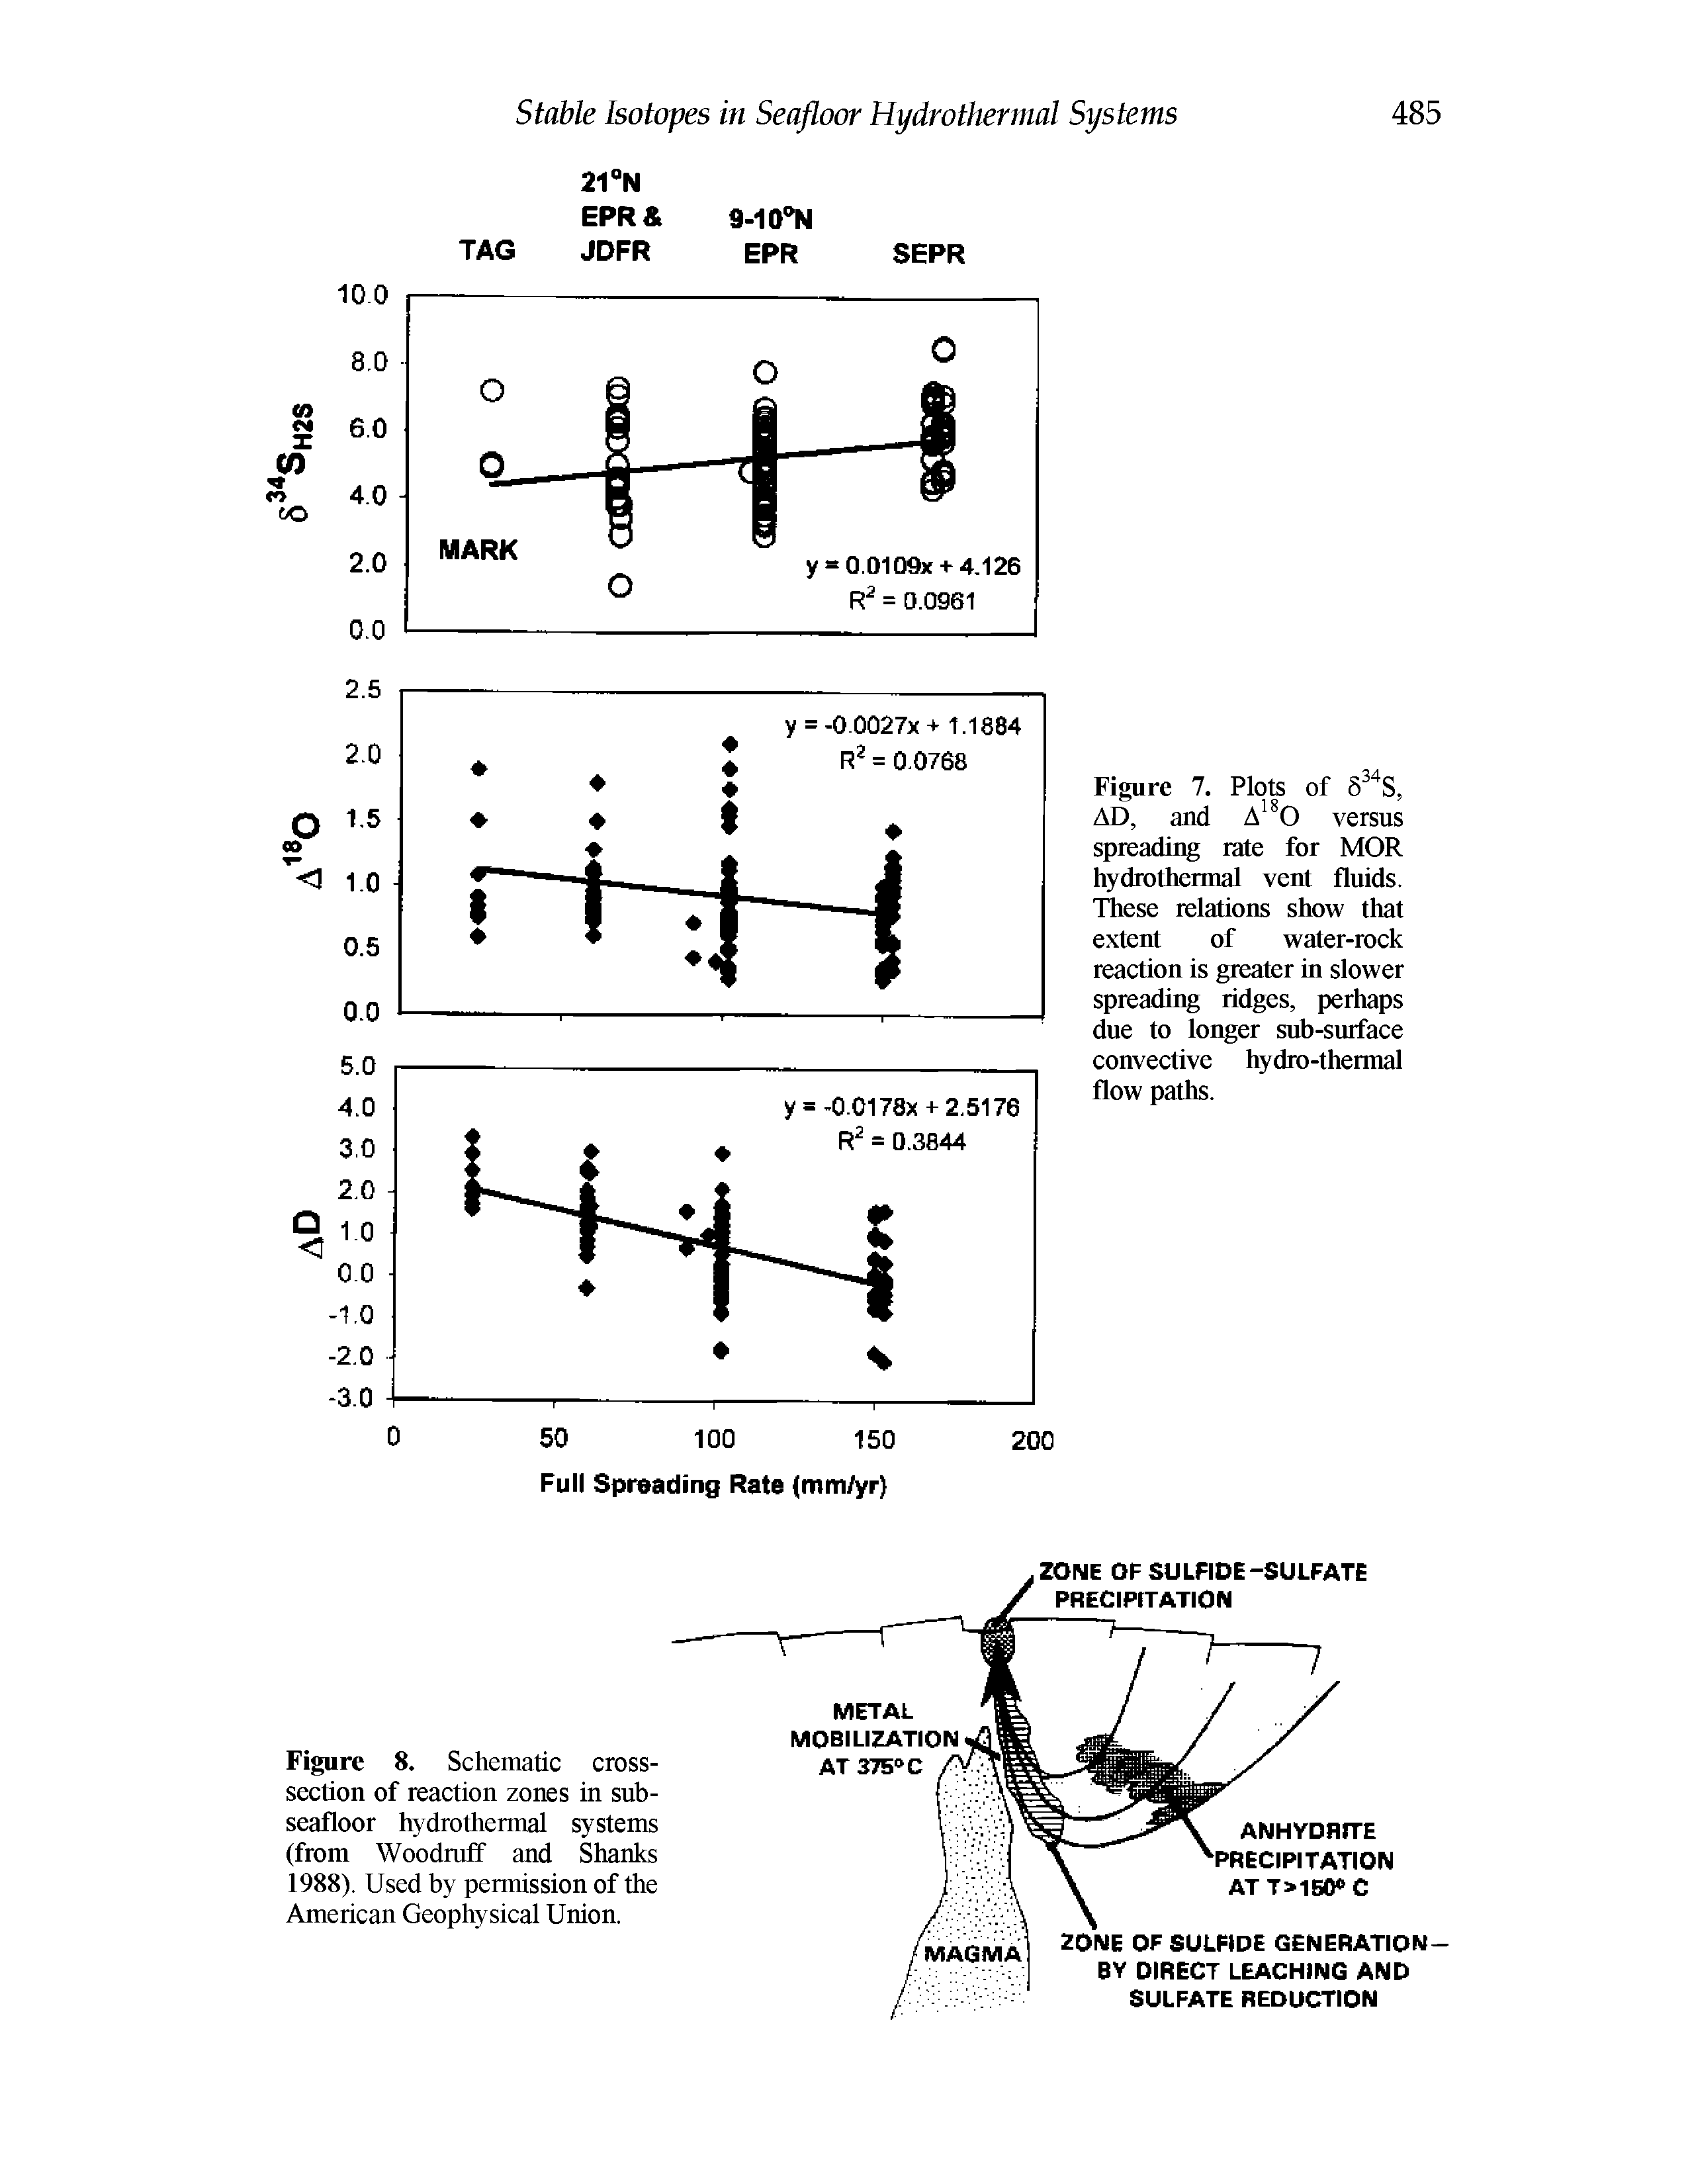 Figure 7. Plots of AD, and A 0 versus spreading rate for MOR hydrothermal vent fluids. These relations show that extent of water-rock reaction is greater in slower spreading ridges, perhaps due to longer snb-surface convective hydro-thermal flow paths.